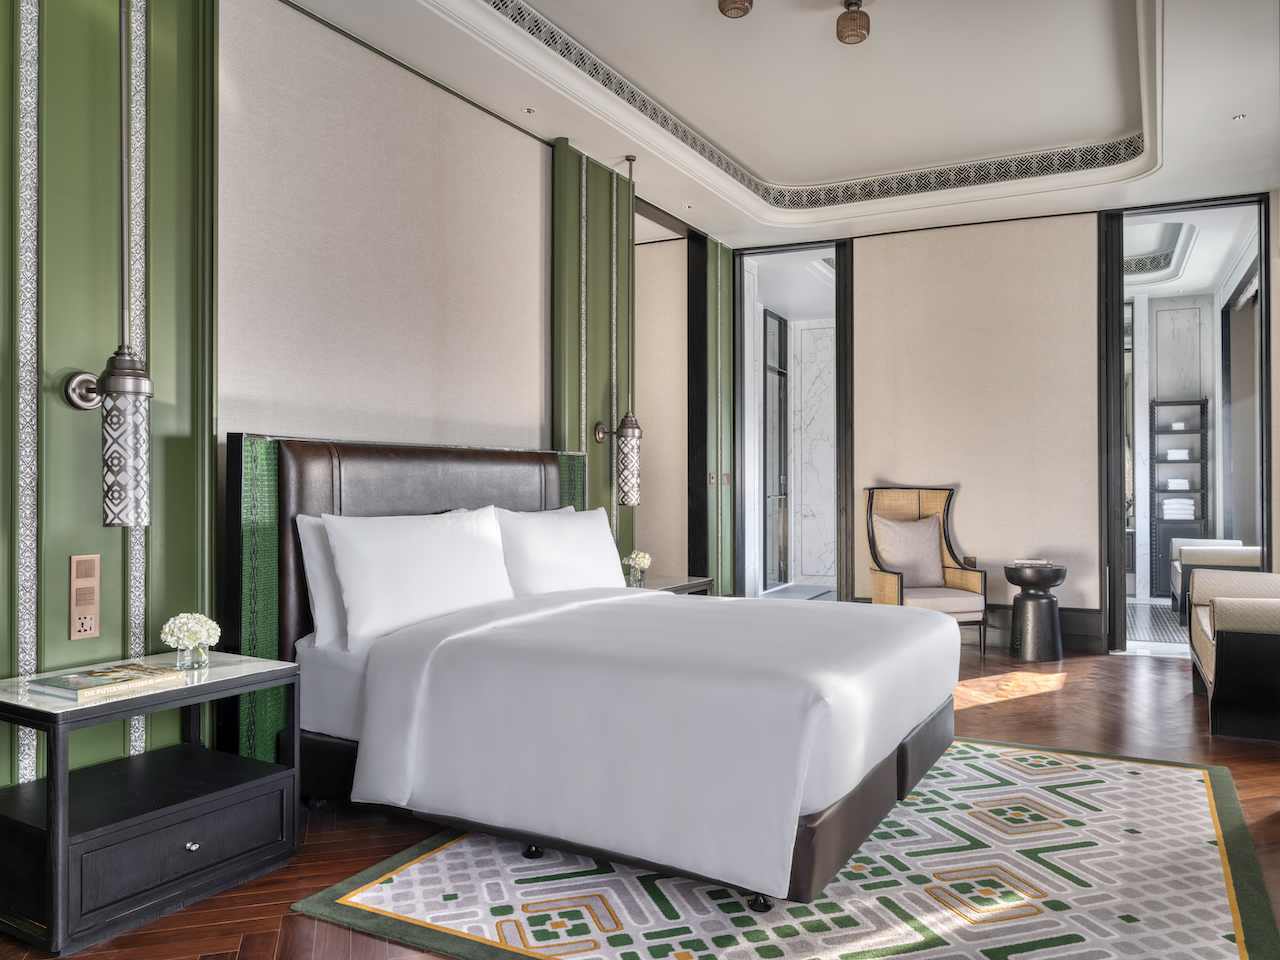 The Presidential Suite also features Lanna-inspired décor with bespoke finishes using traditional techniques such as wood carving and metal beating.